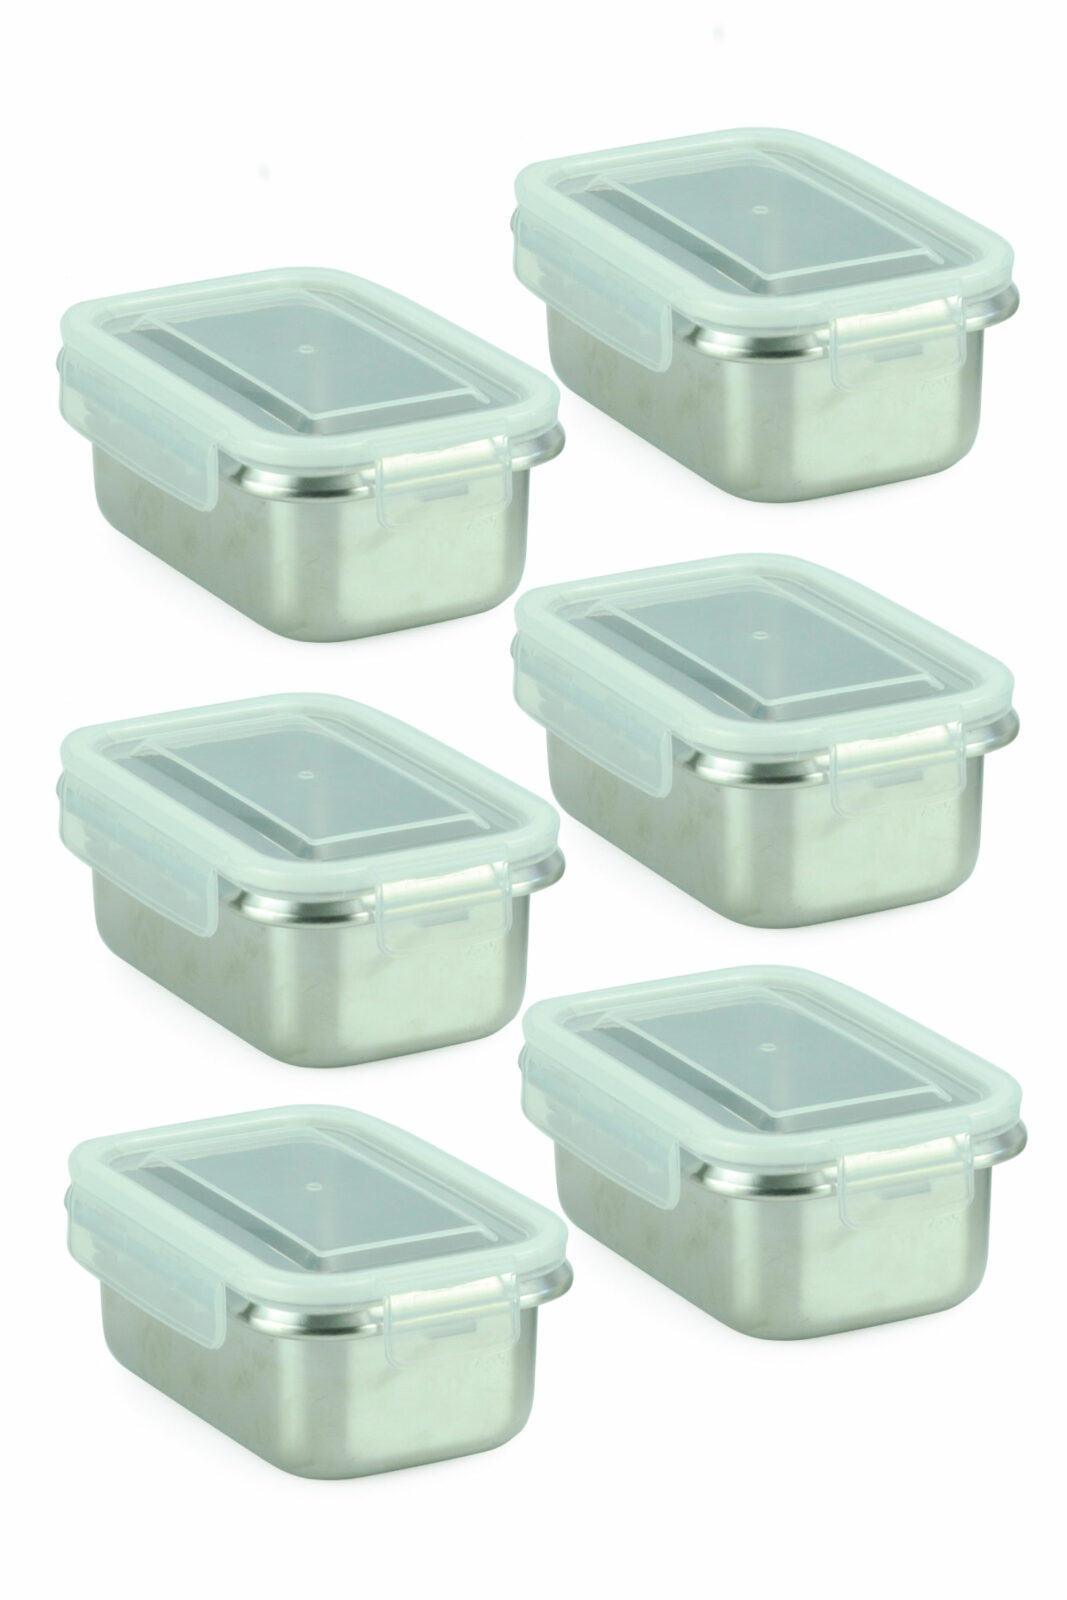 Stainless Steel Food Storage Containers - RT500ml x 6 - Minimal